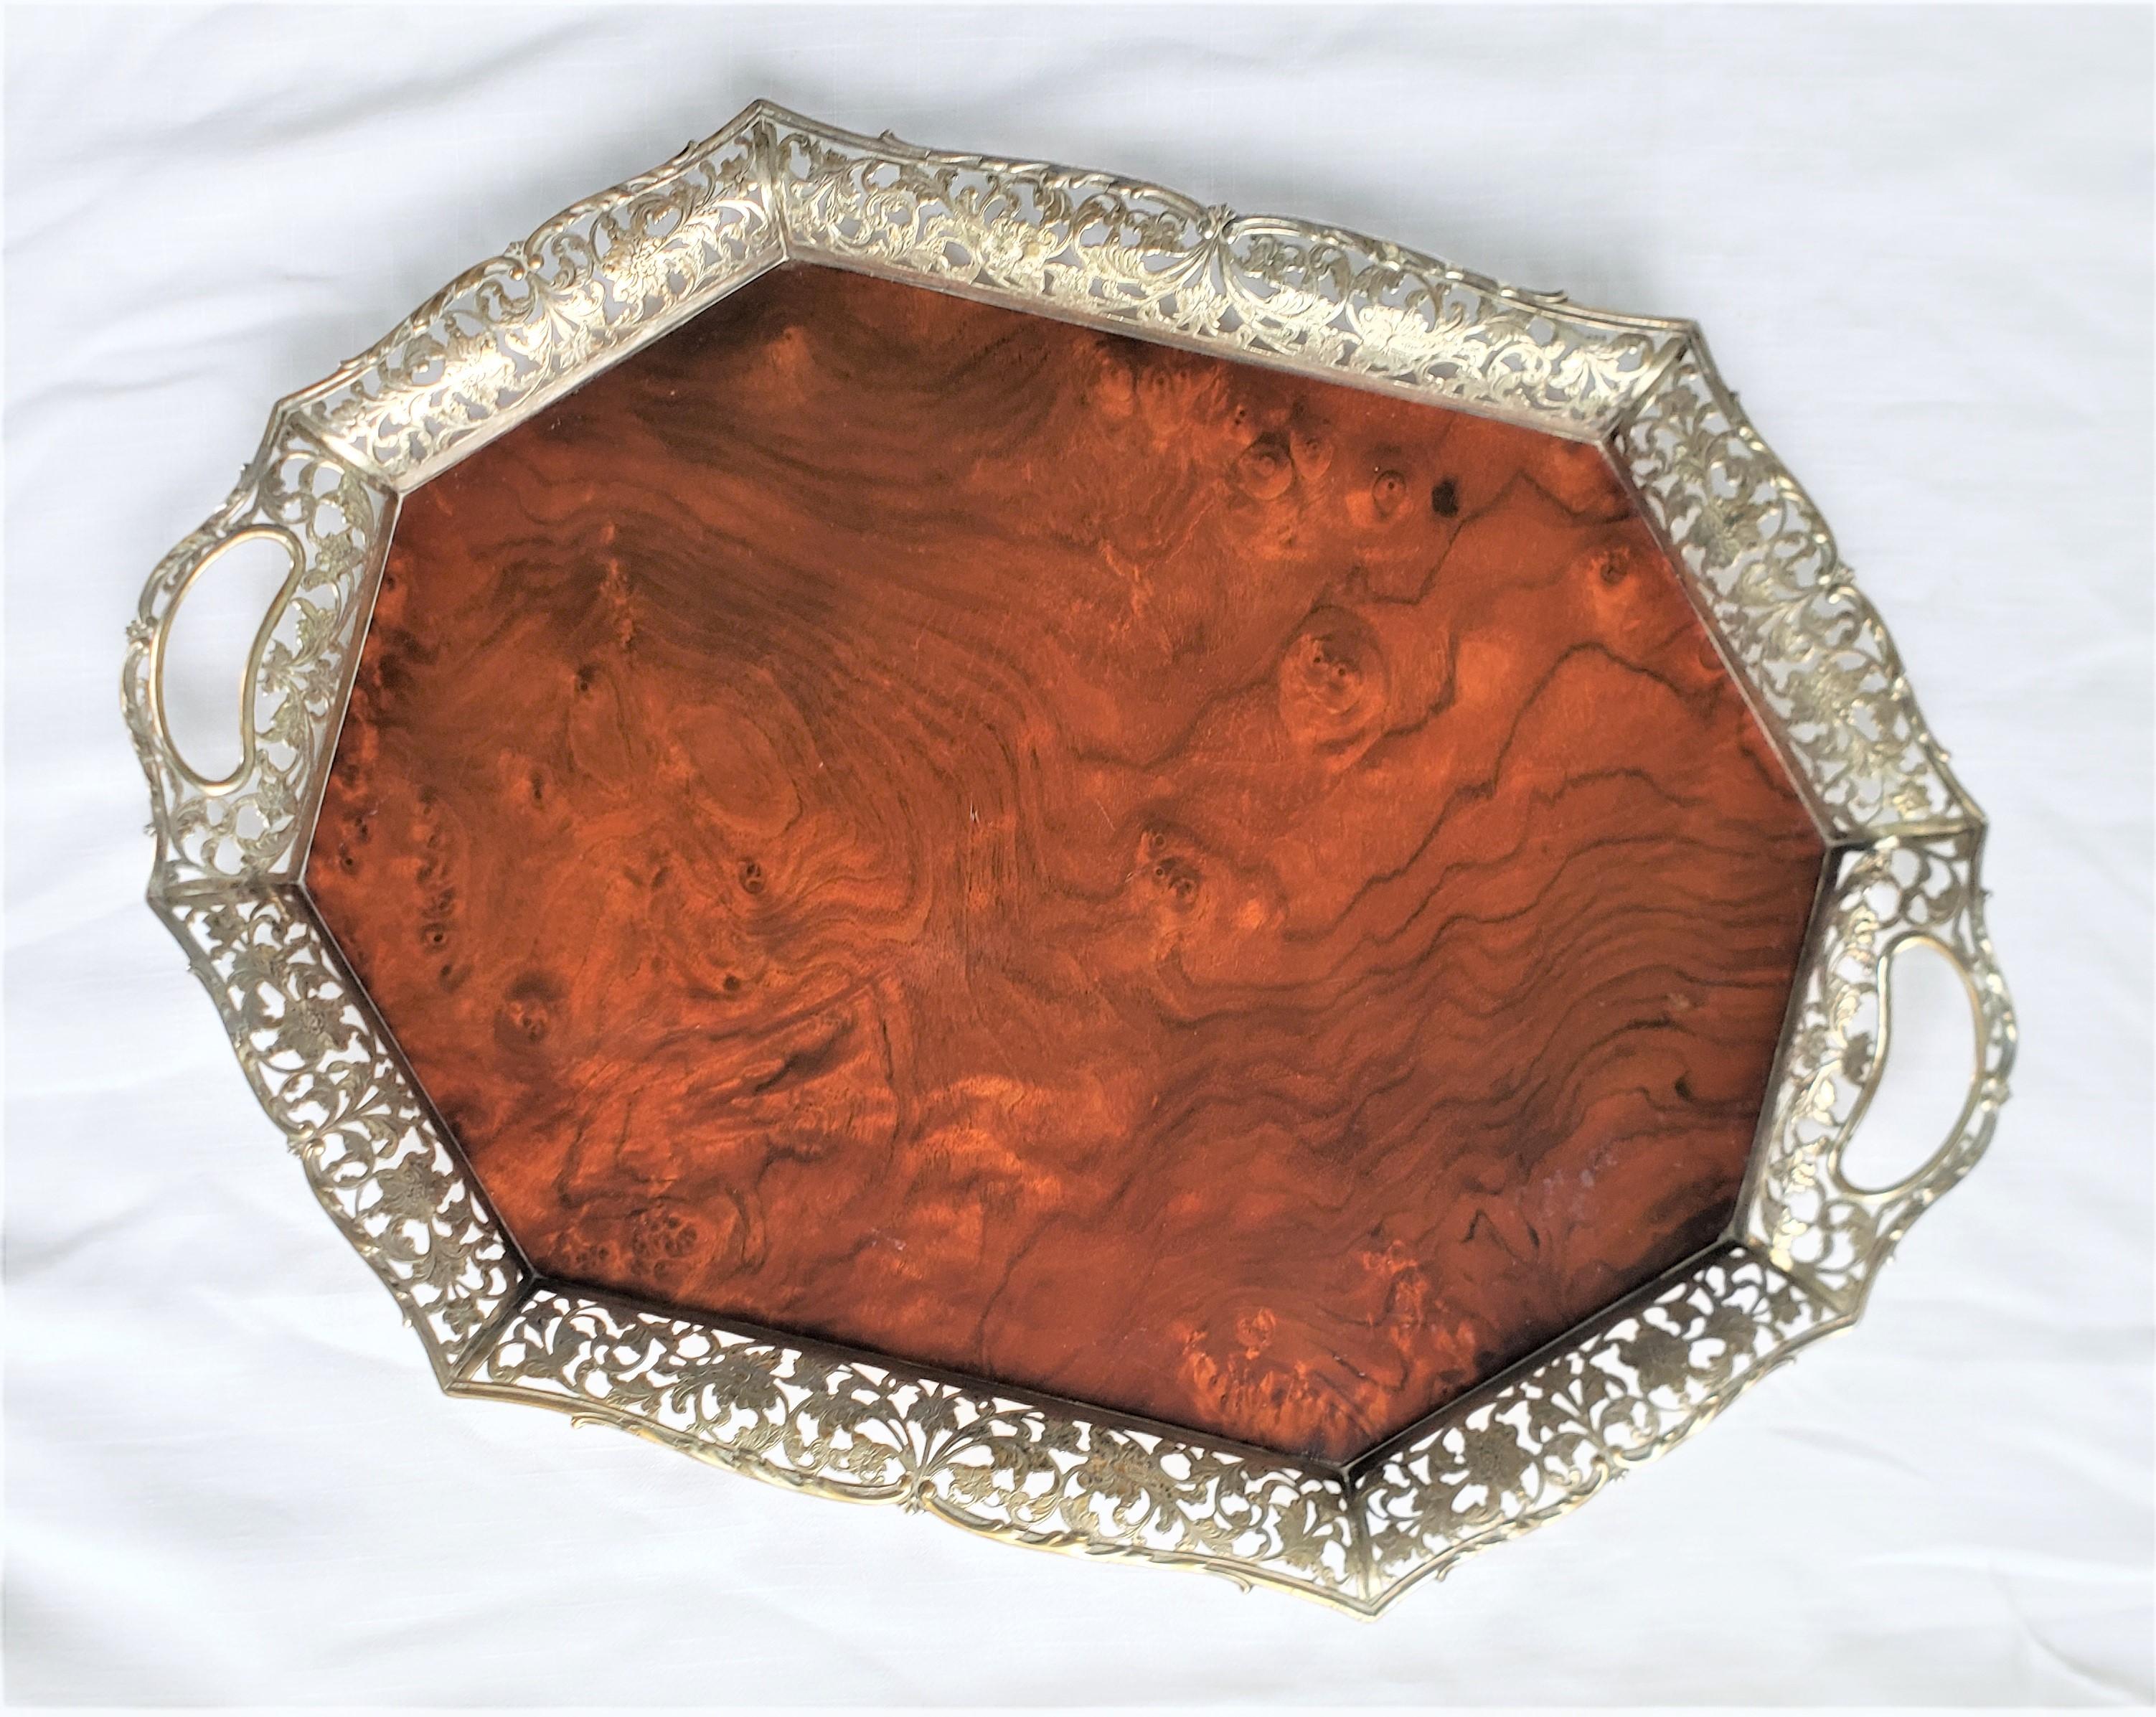 This antique serving tray has no maker's mark, but originated from the Netherlands and dates to approximately 1920 and done in an Art Nouveau style. The base of the tray is done in a lacquered burled walnut which accents the pierced solid silver